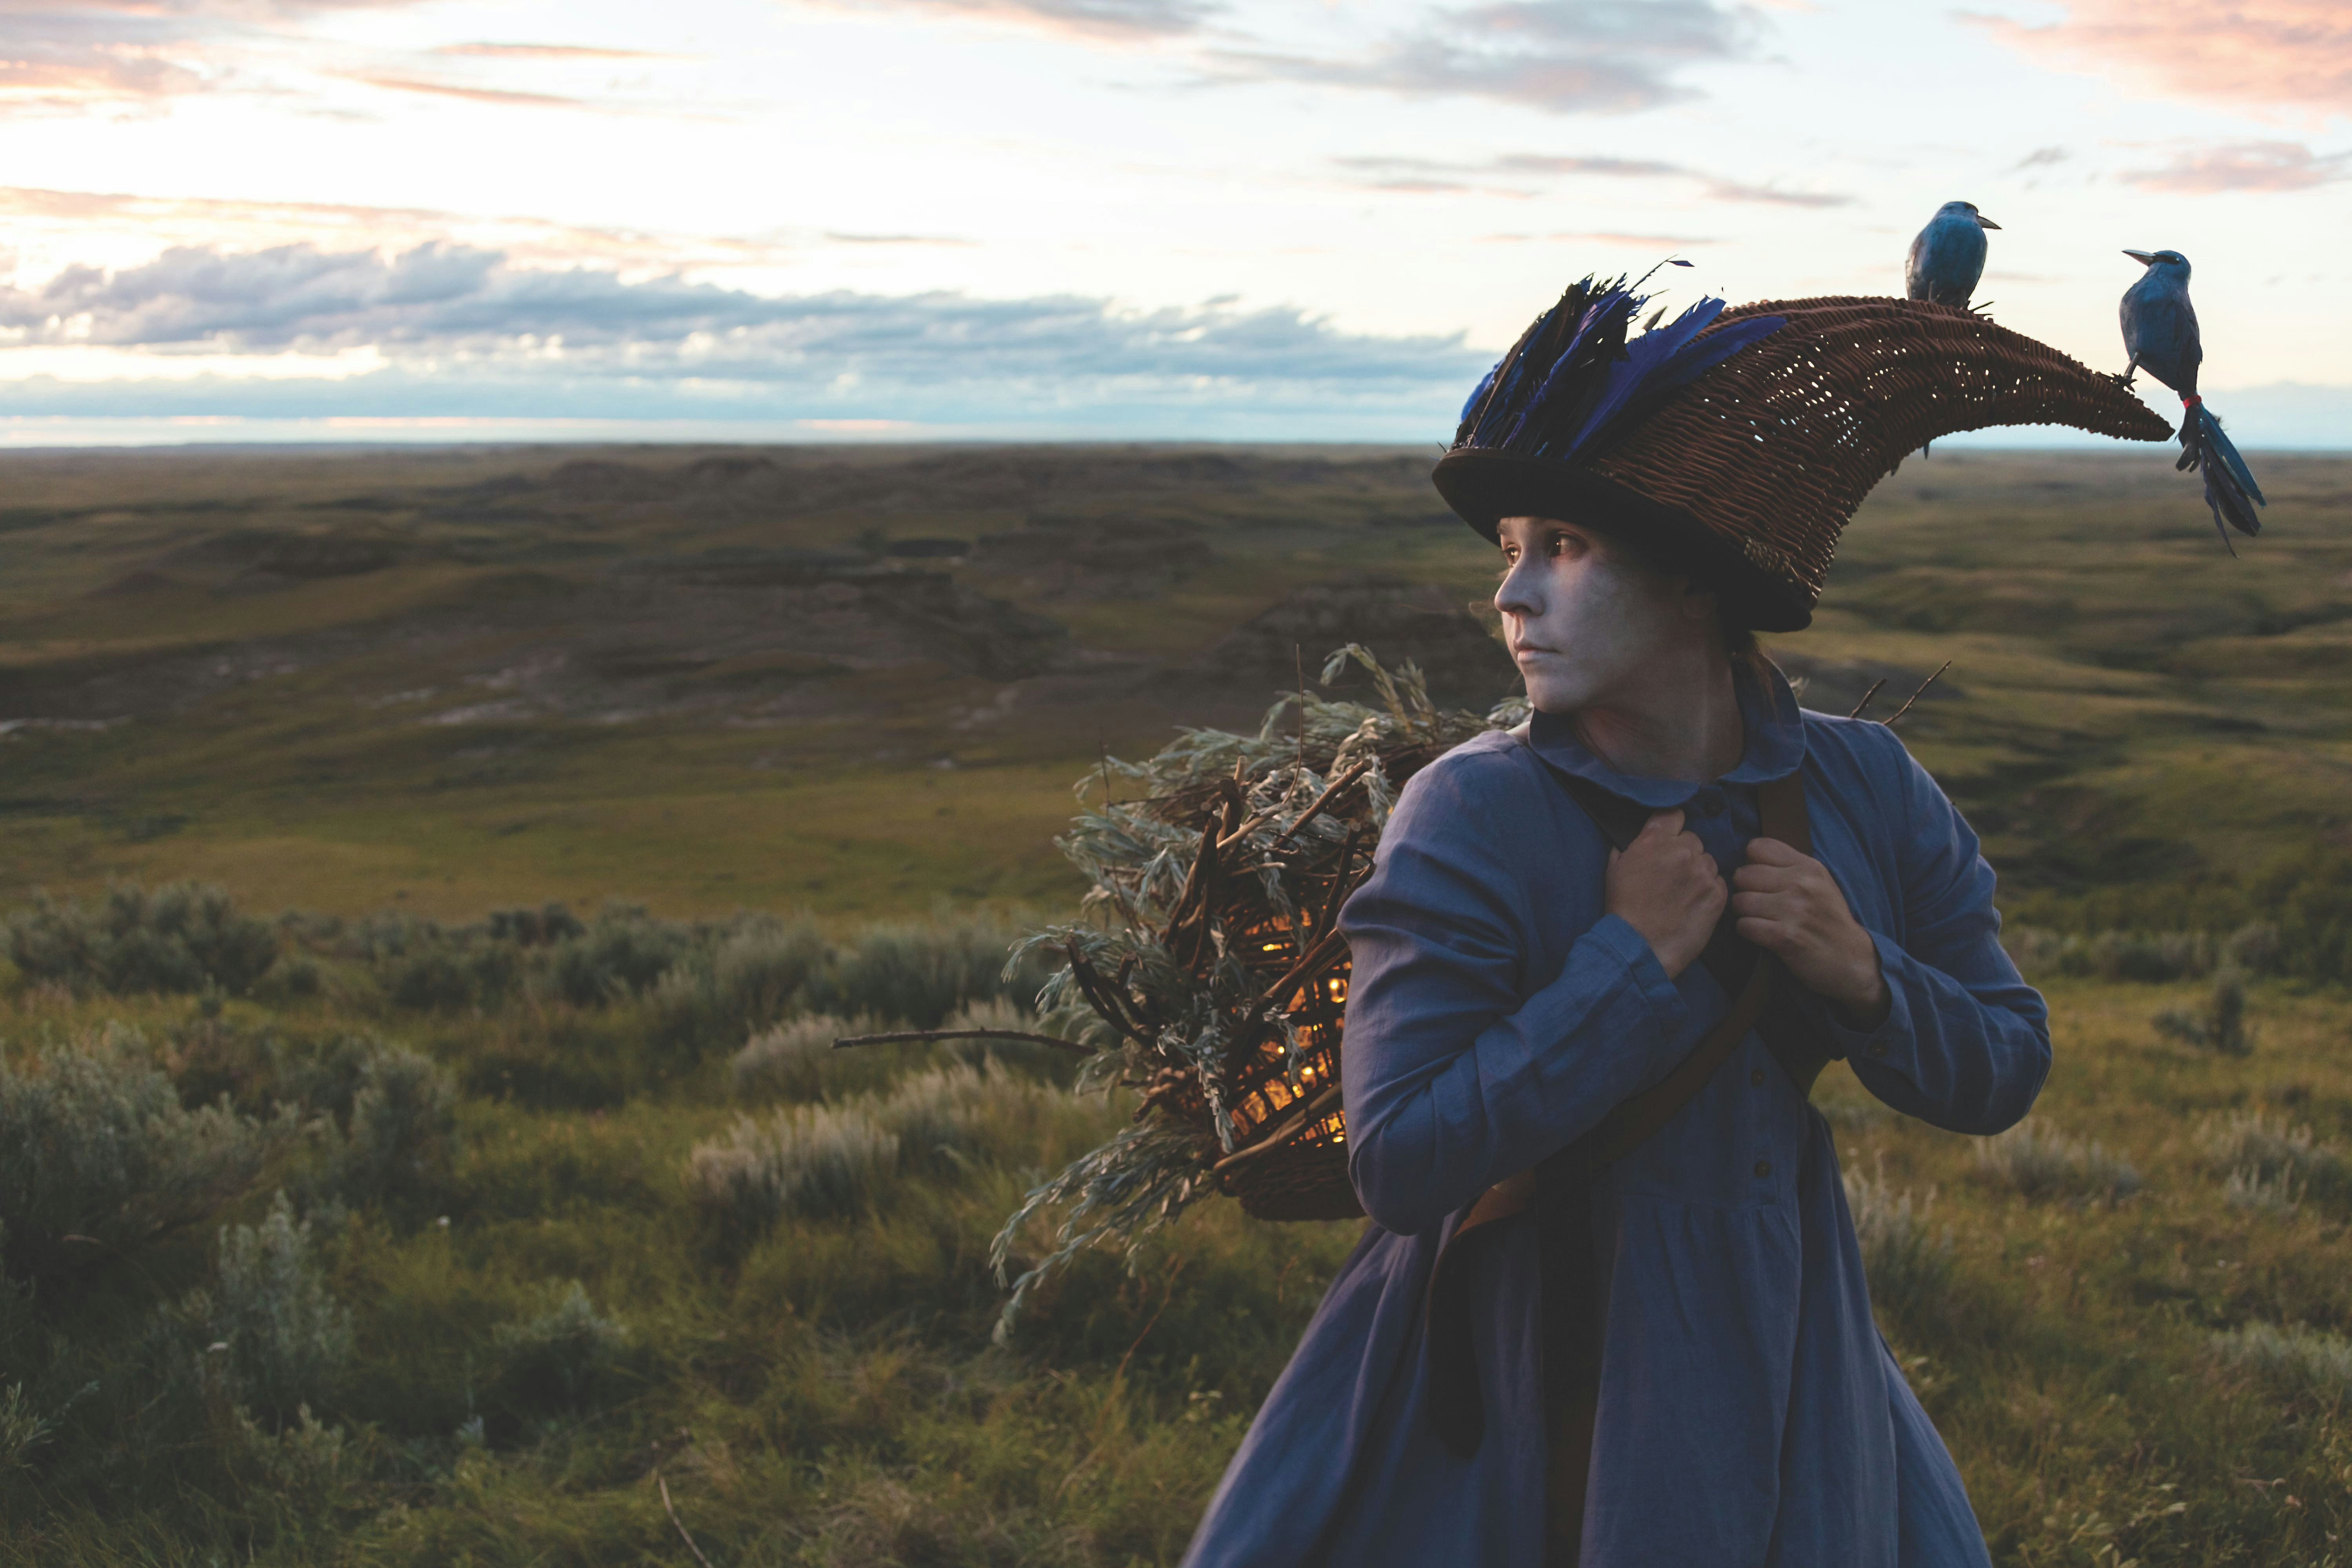 A still from the video piece “Lead Me to Places I Could Never Find on My Own” by Meryl McMaster